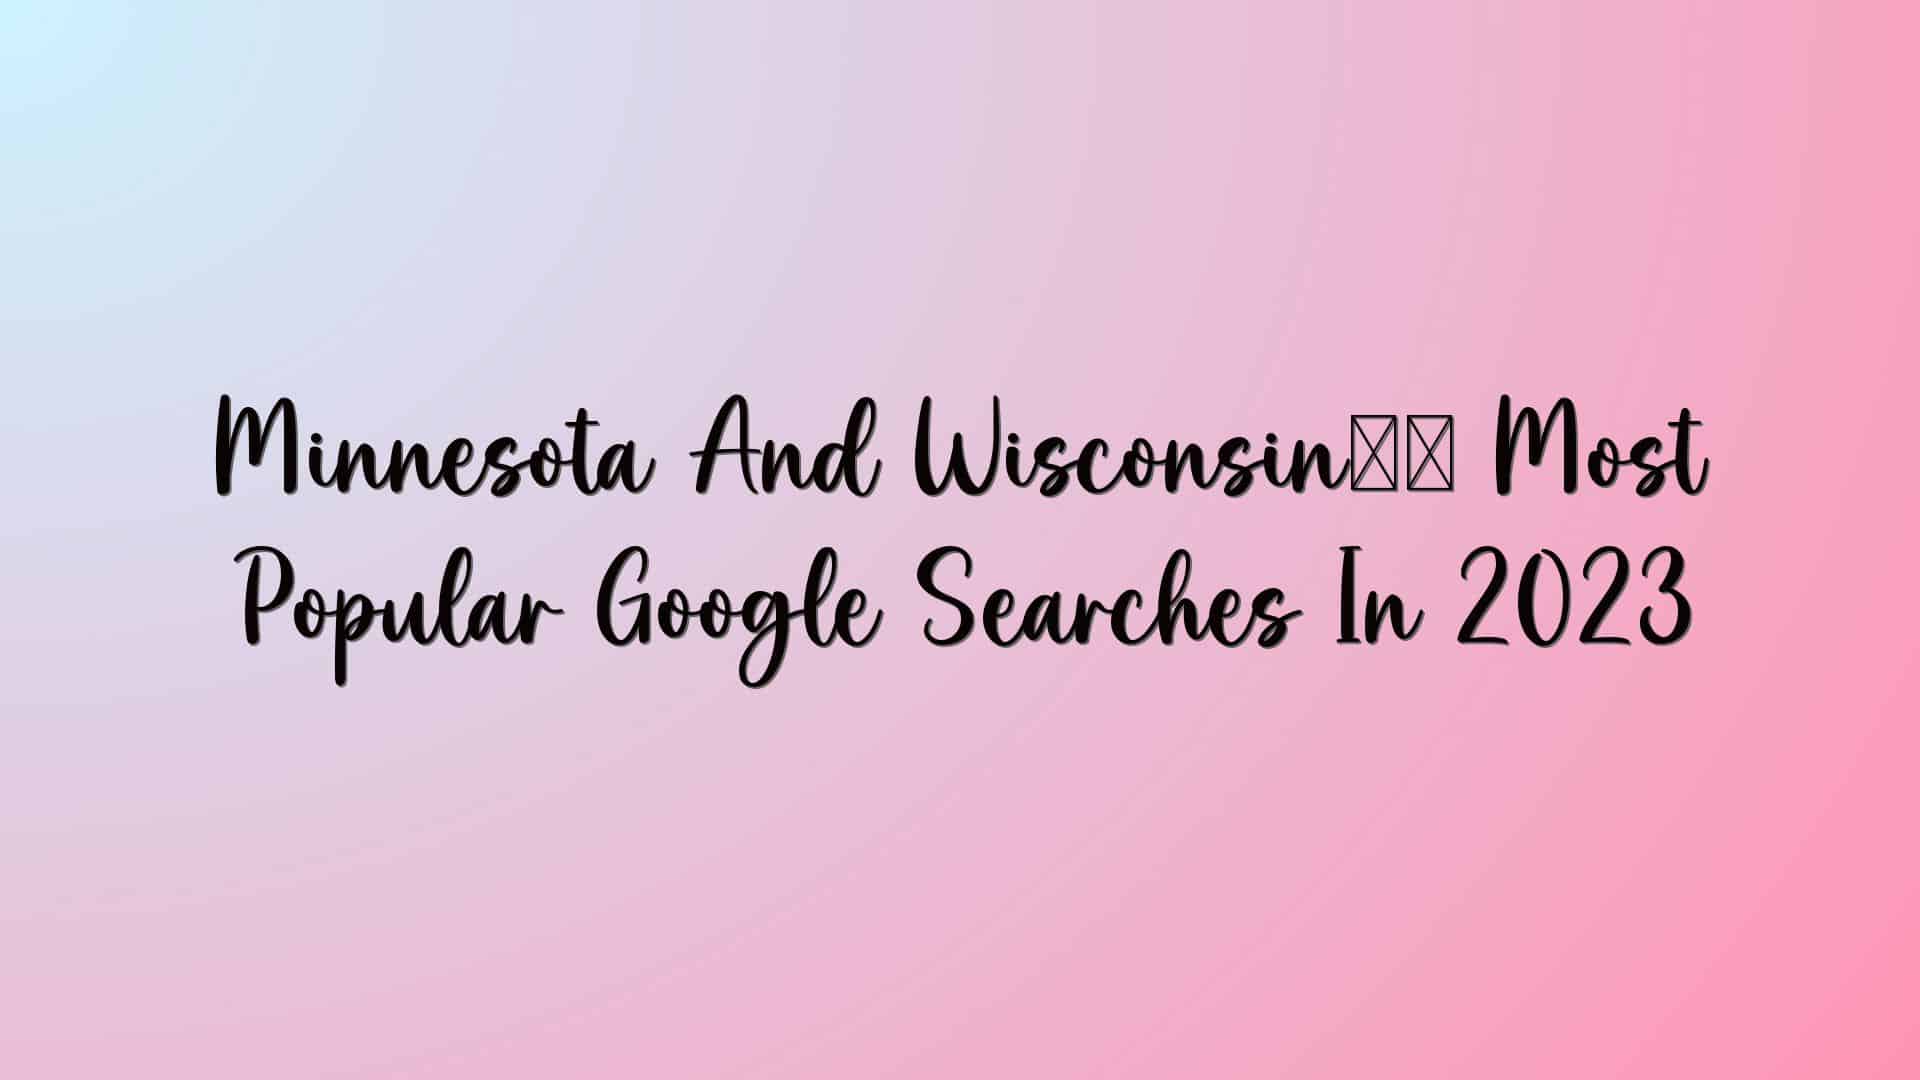 Minnesota And Wisconsin’s Most Popular Google Searches In 2023